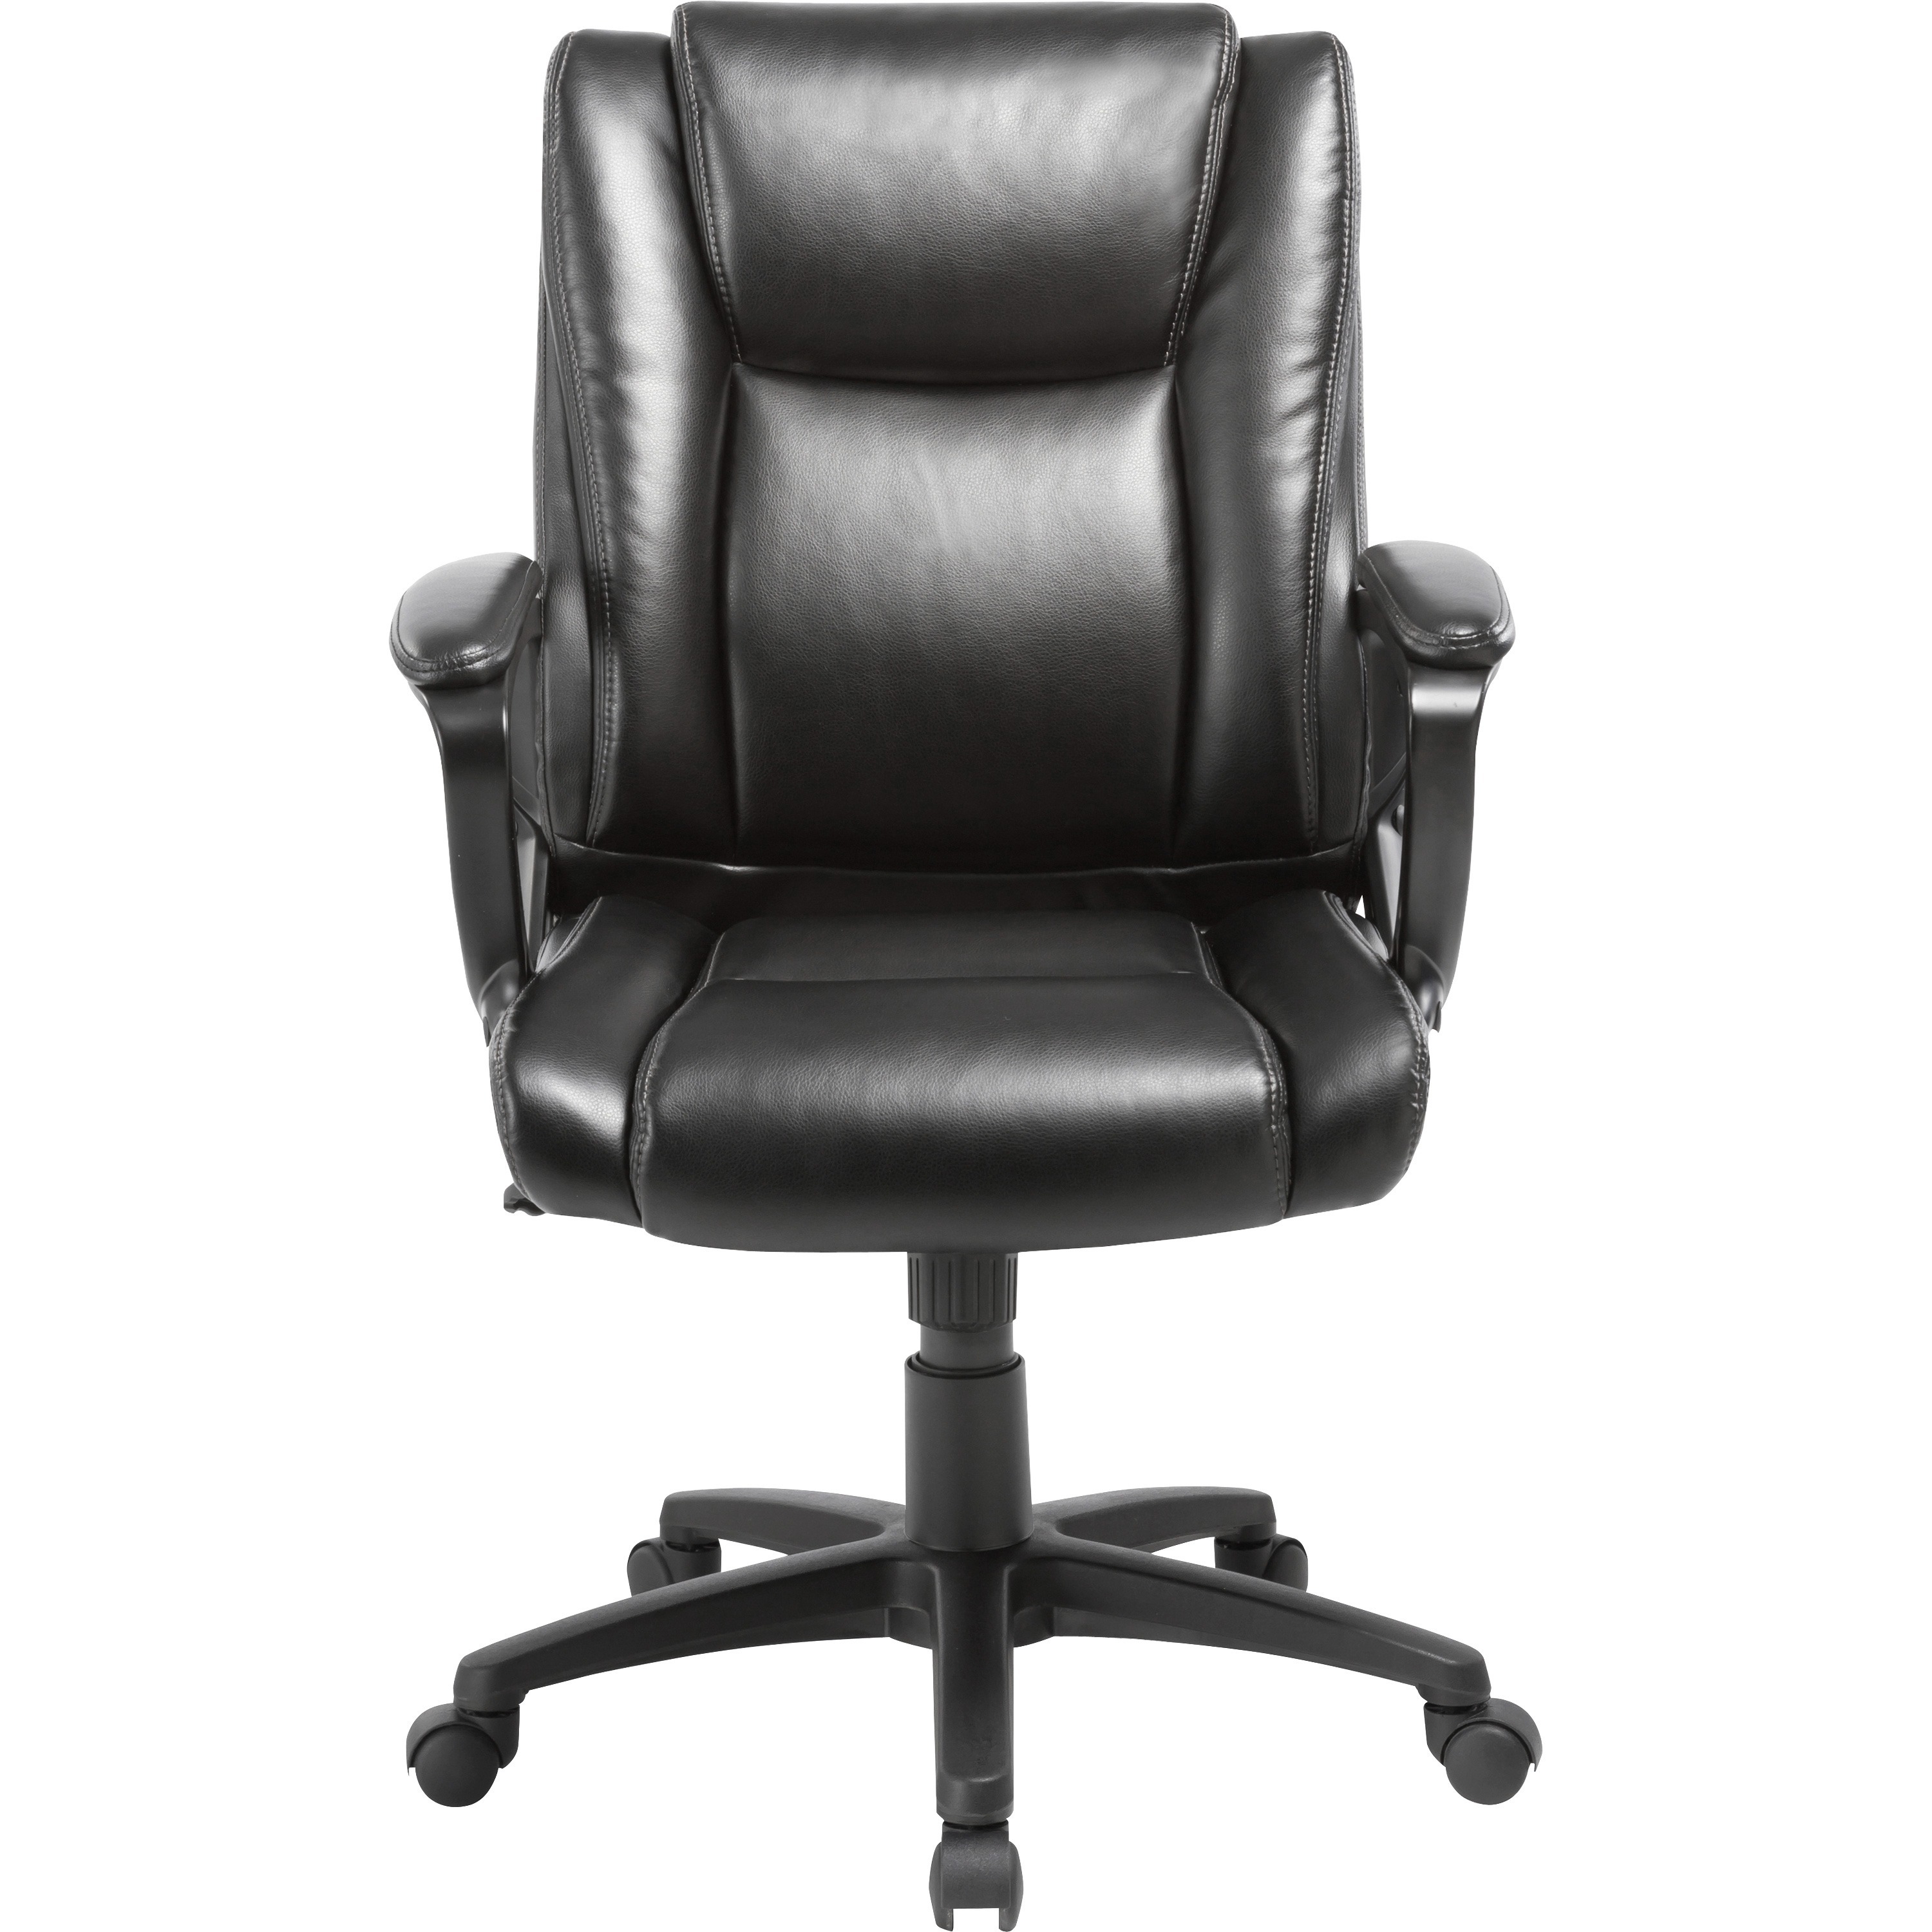 Lorell, Soho High-back Leather Chair, 1 Each - image 2 of 5